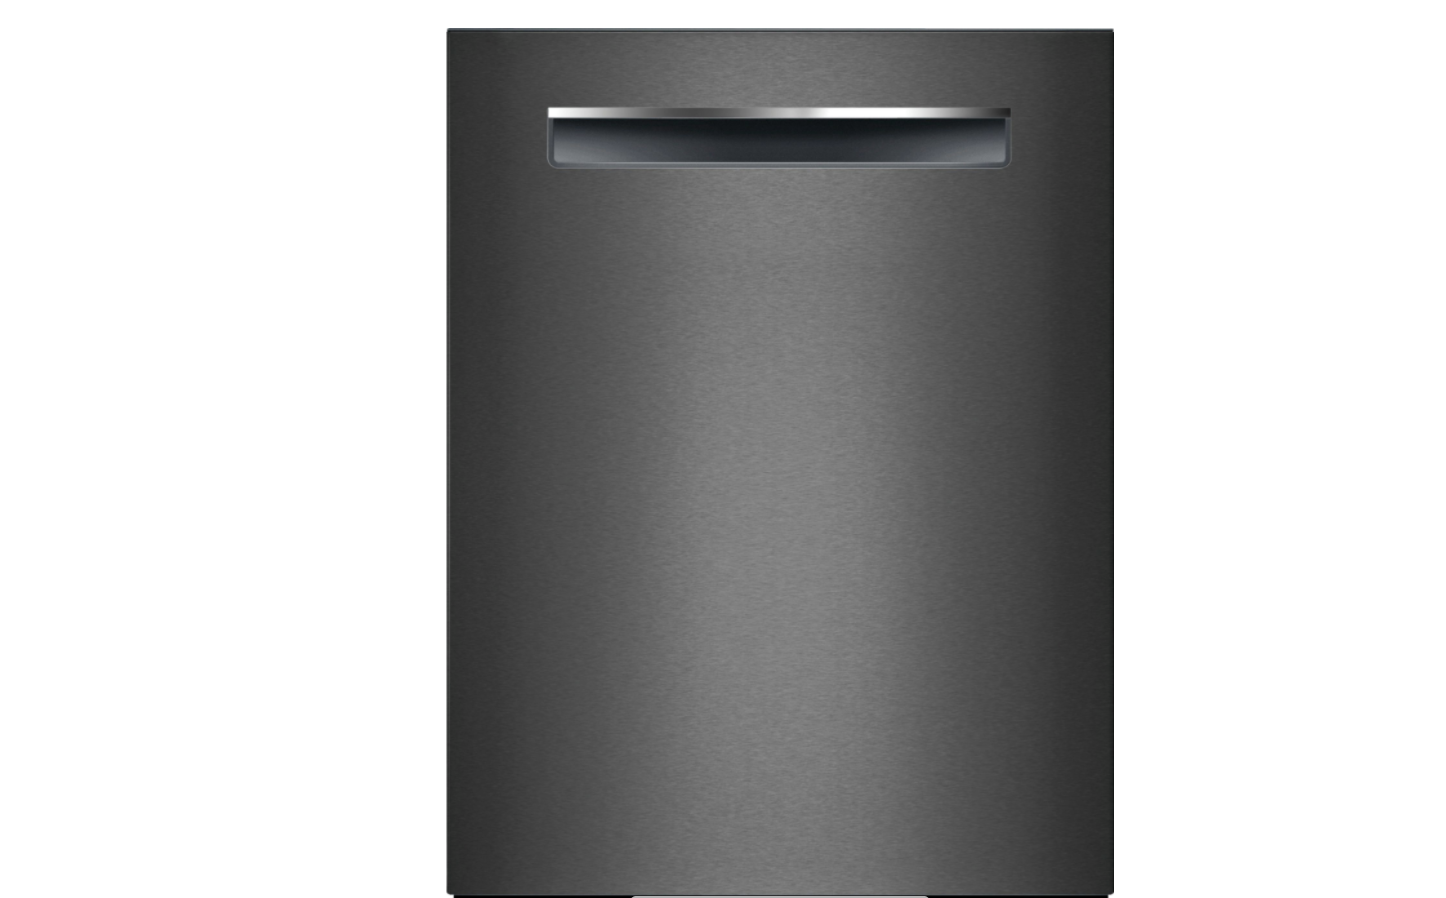 best dishwasher reviews for 2016